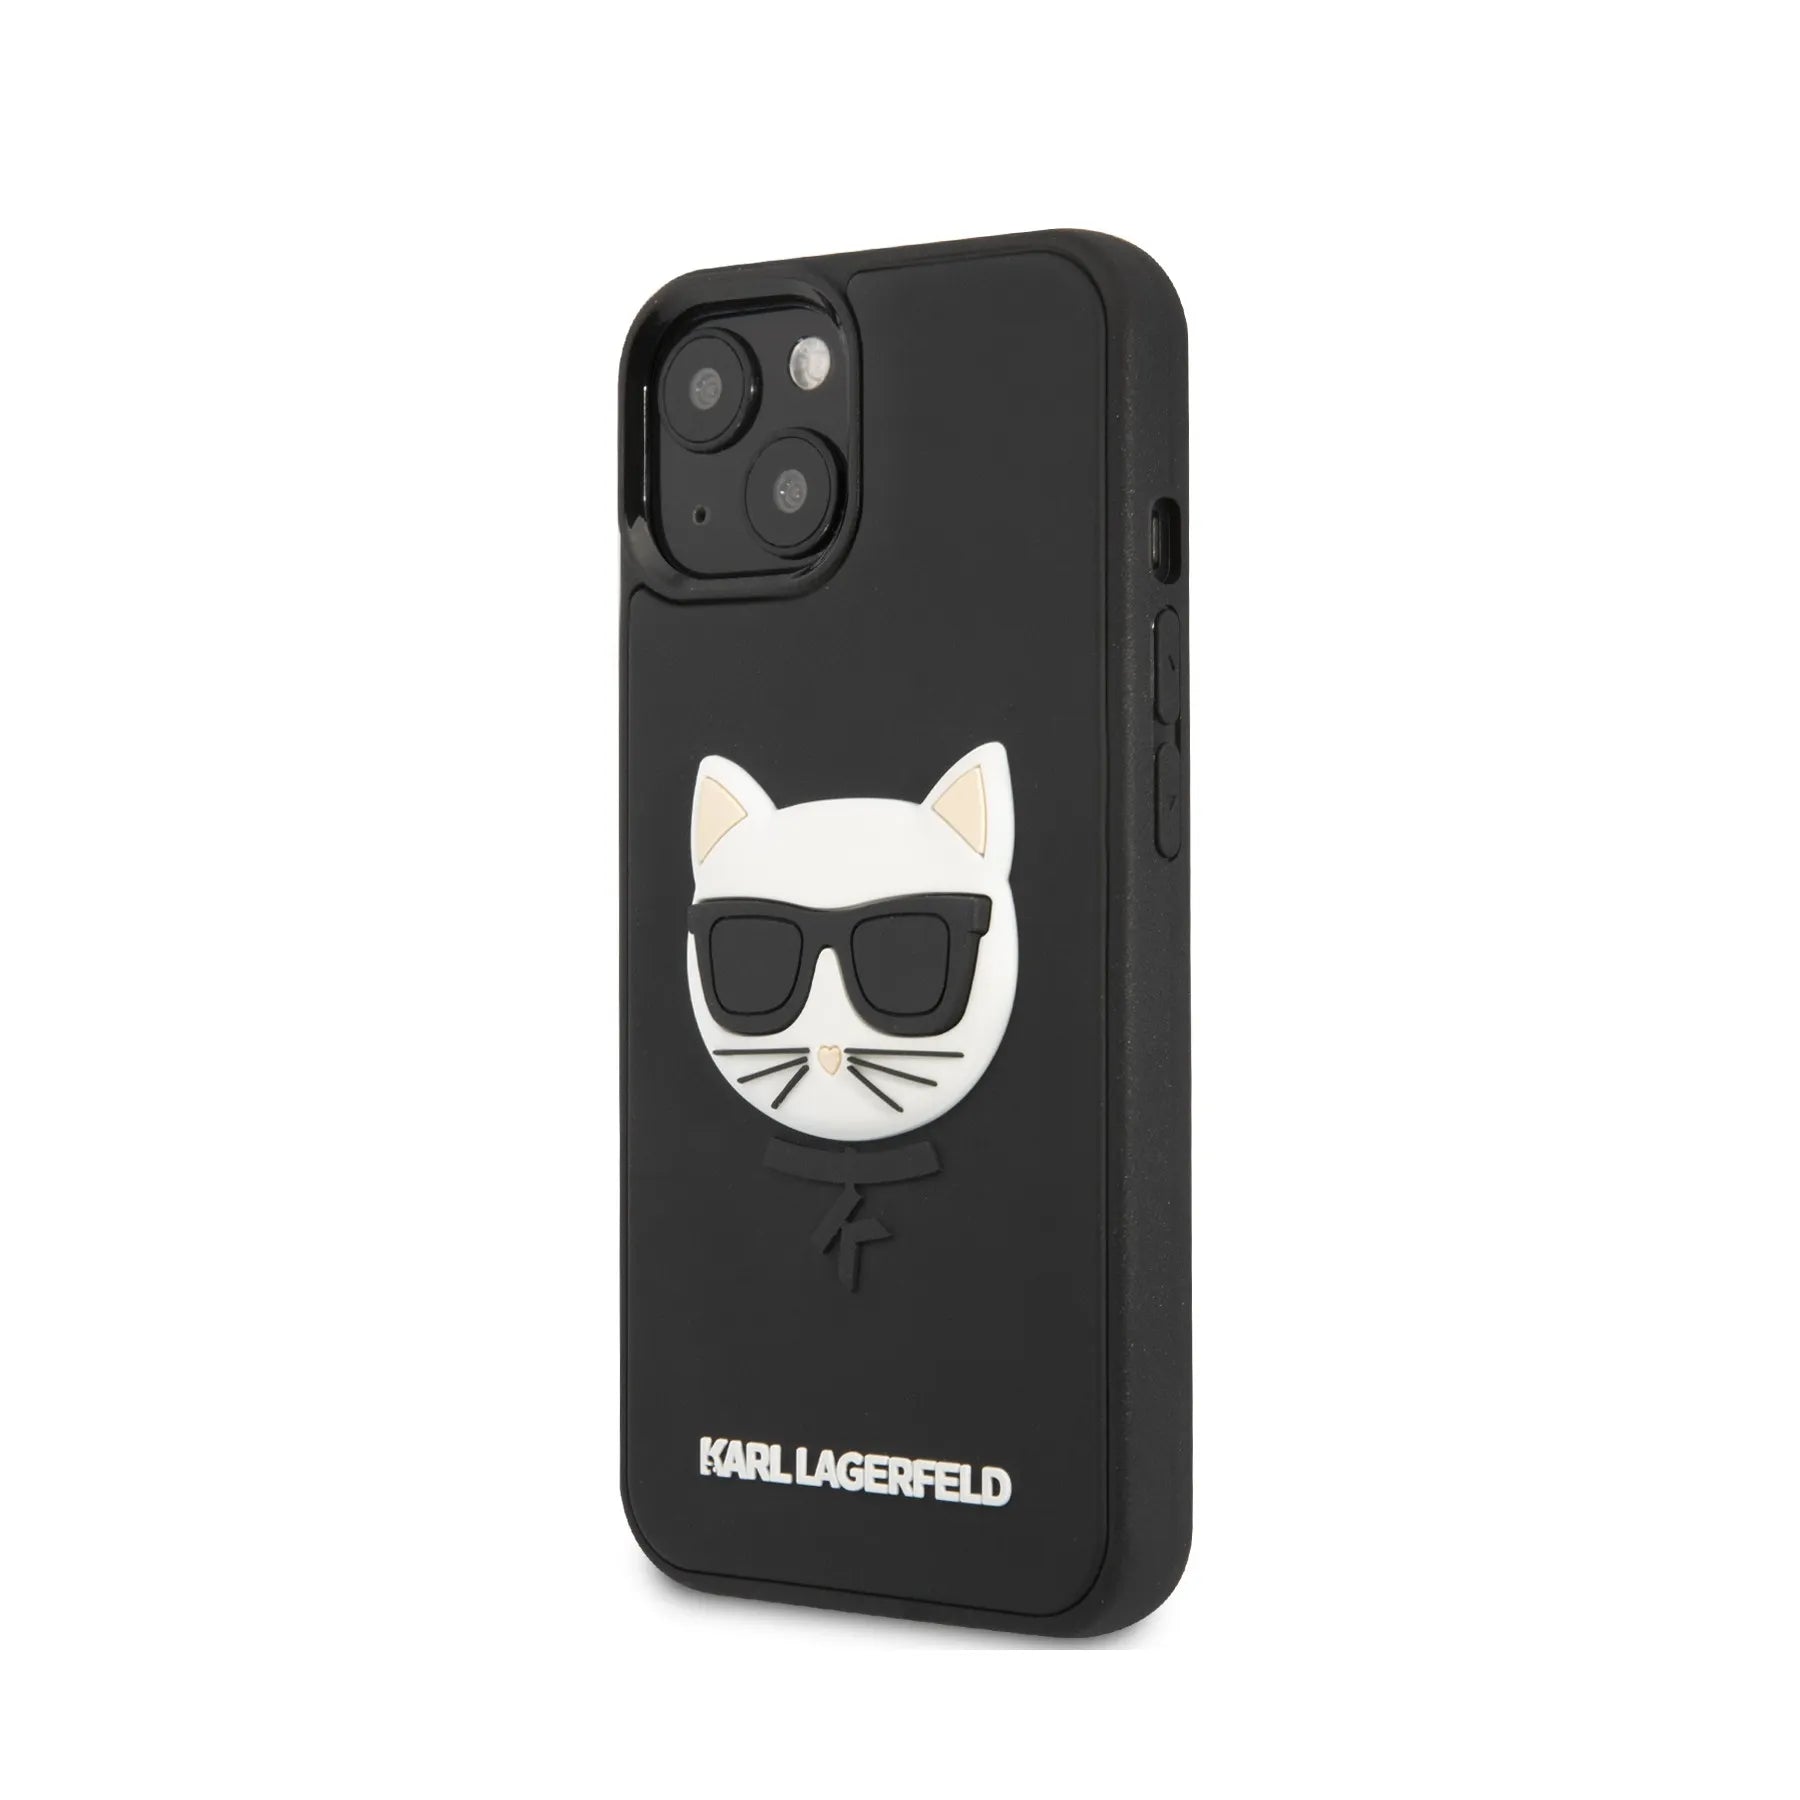 Coque Karl Lagerfeld pour iPhone 13 - My Store